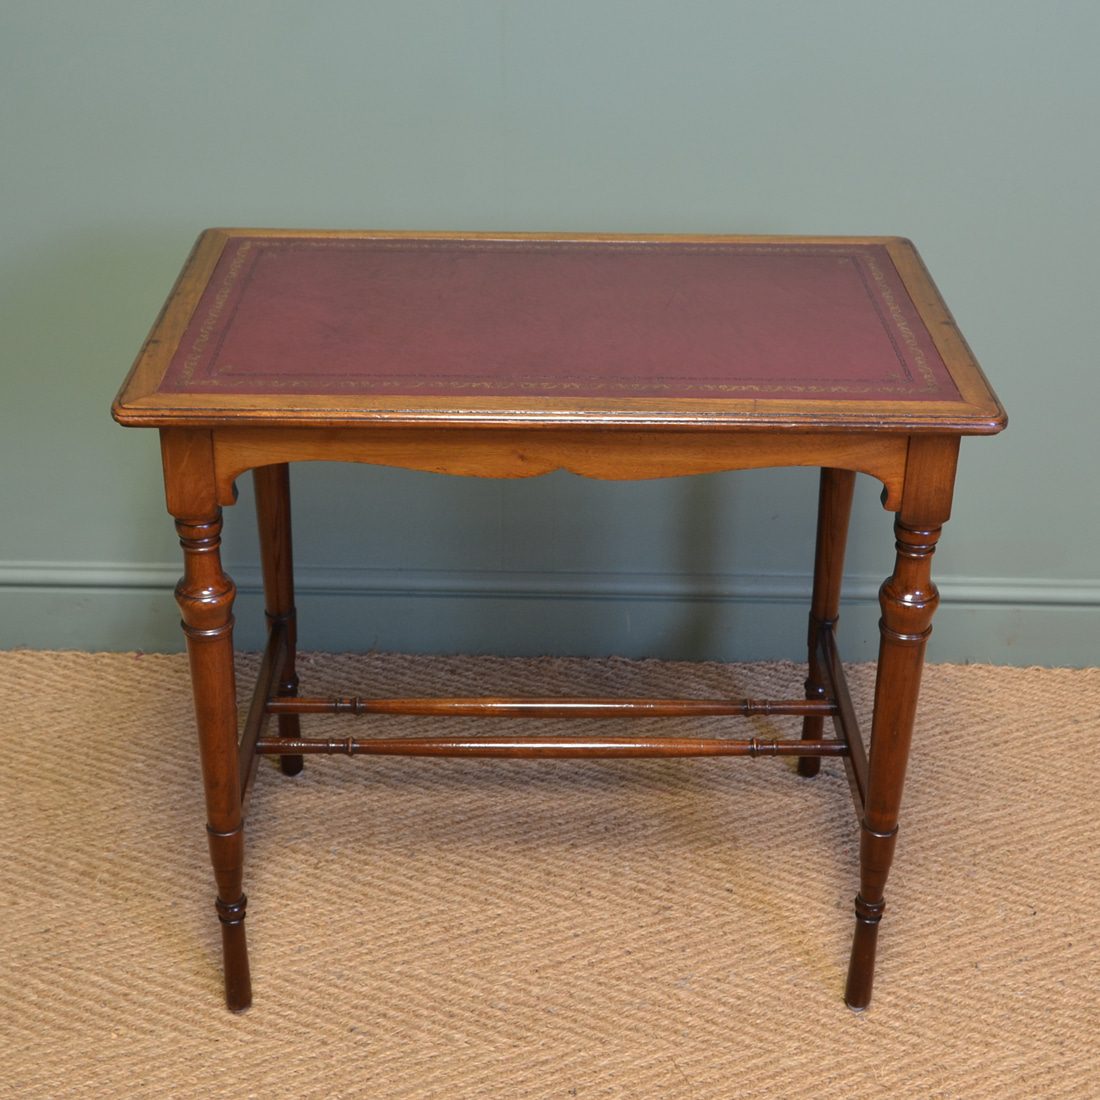 Quality Victorian Arts And Crafts Walnut Antique Side / Writing Table by Lambs of Manchester